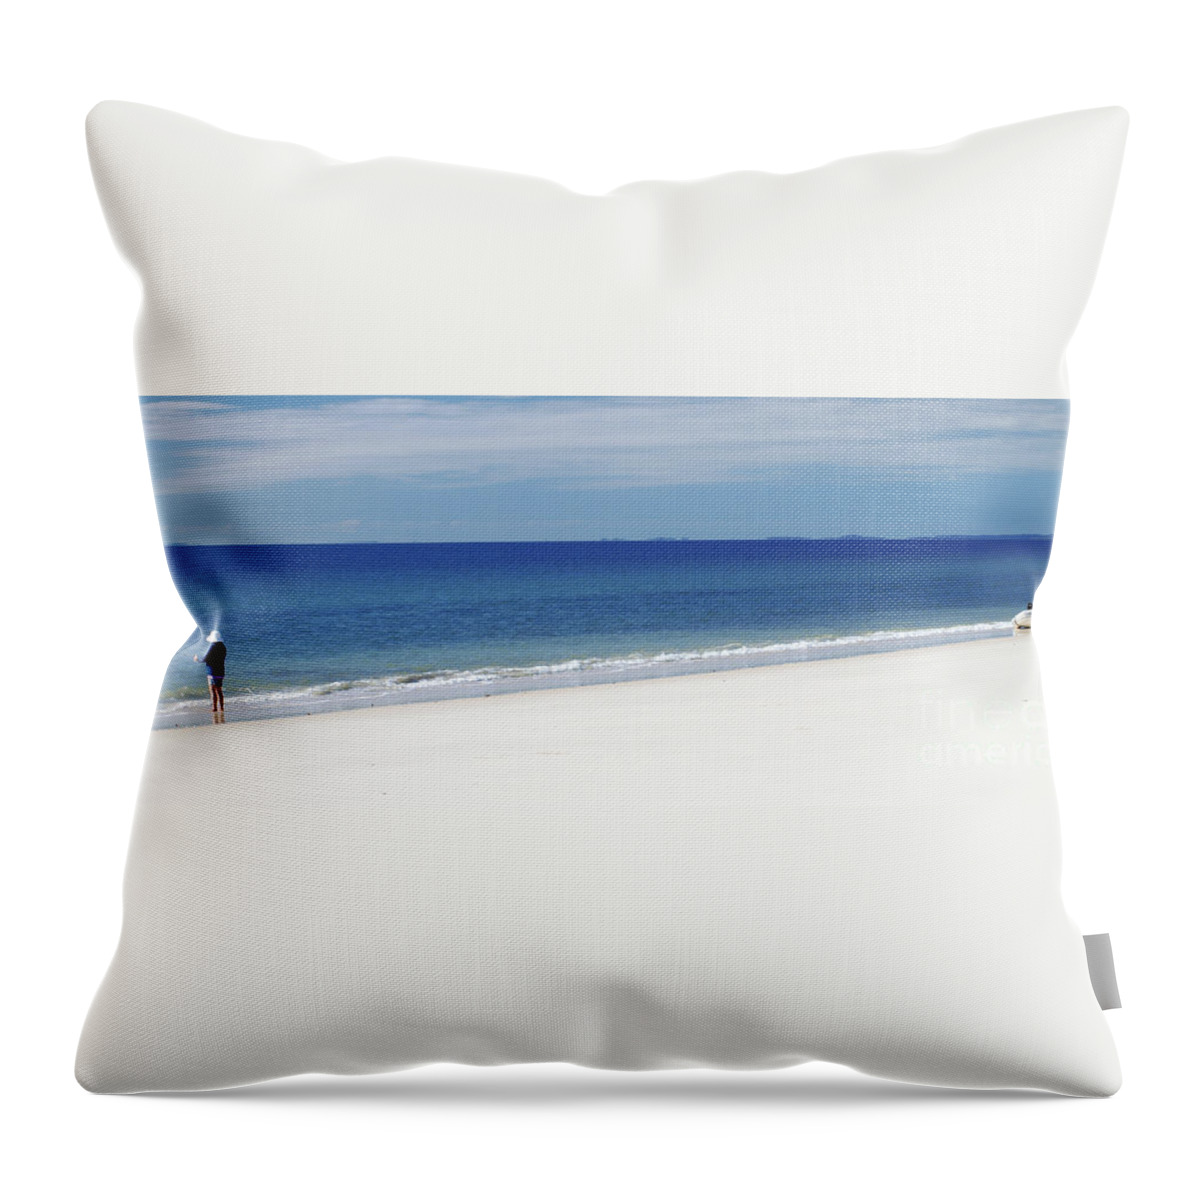 Art Throw Pillow featuring the photograph Fraser Island - West Coast by Geoff Childs